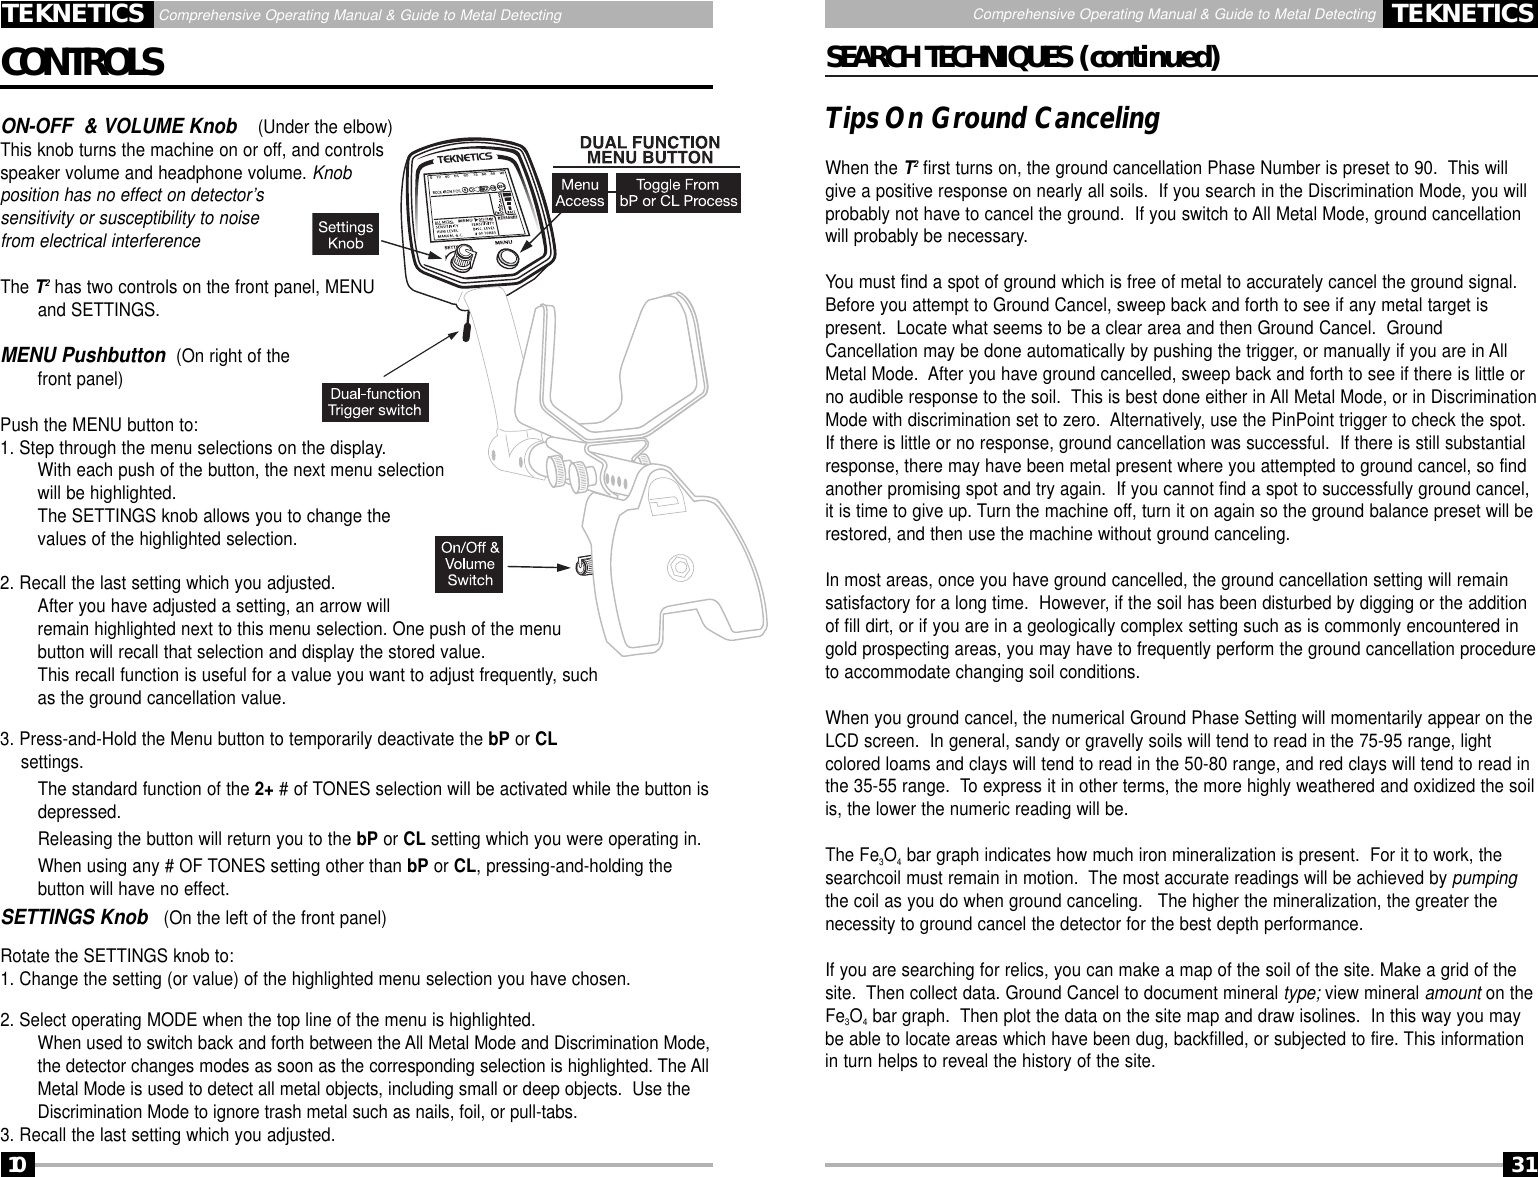 Page 31 of First Texas T2MD Professional Metal Detector User Manual Layout 1